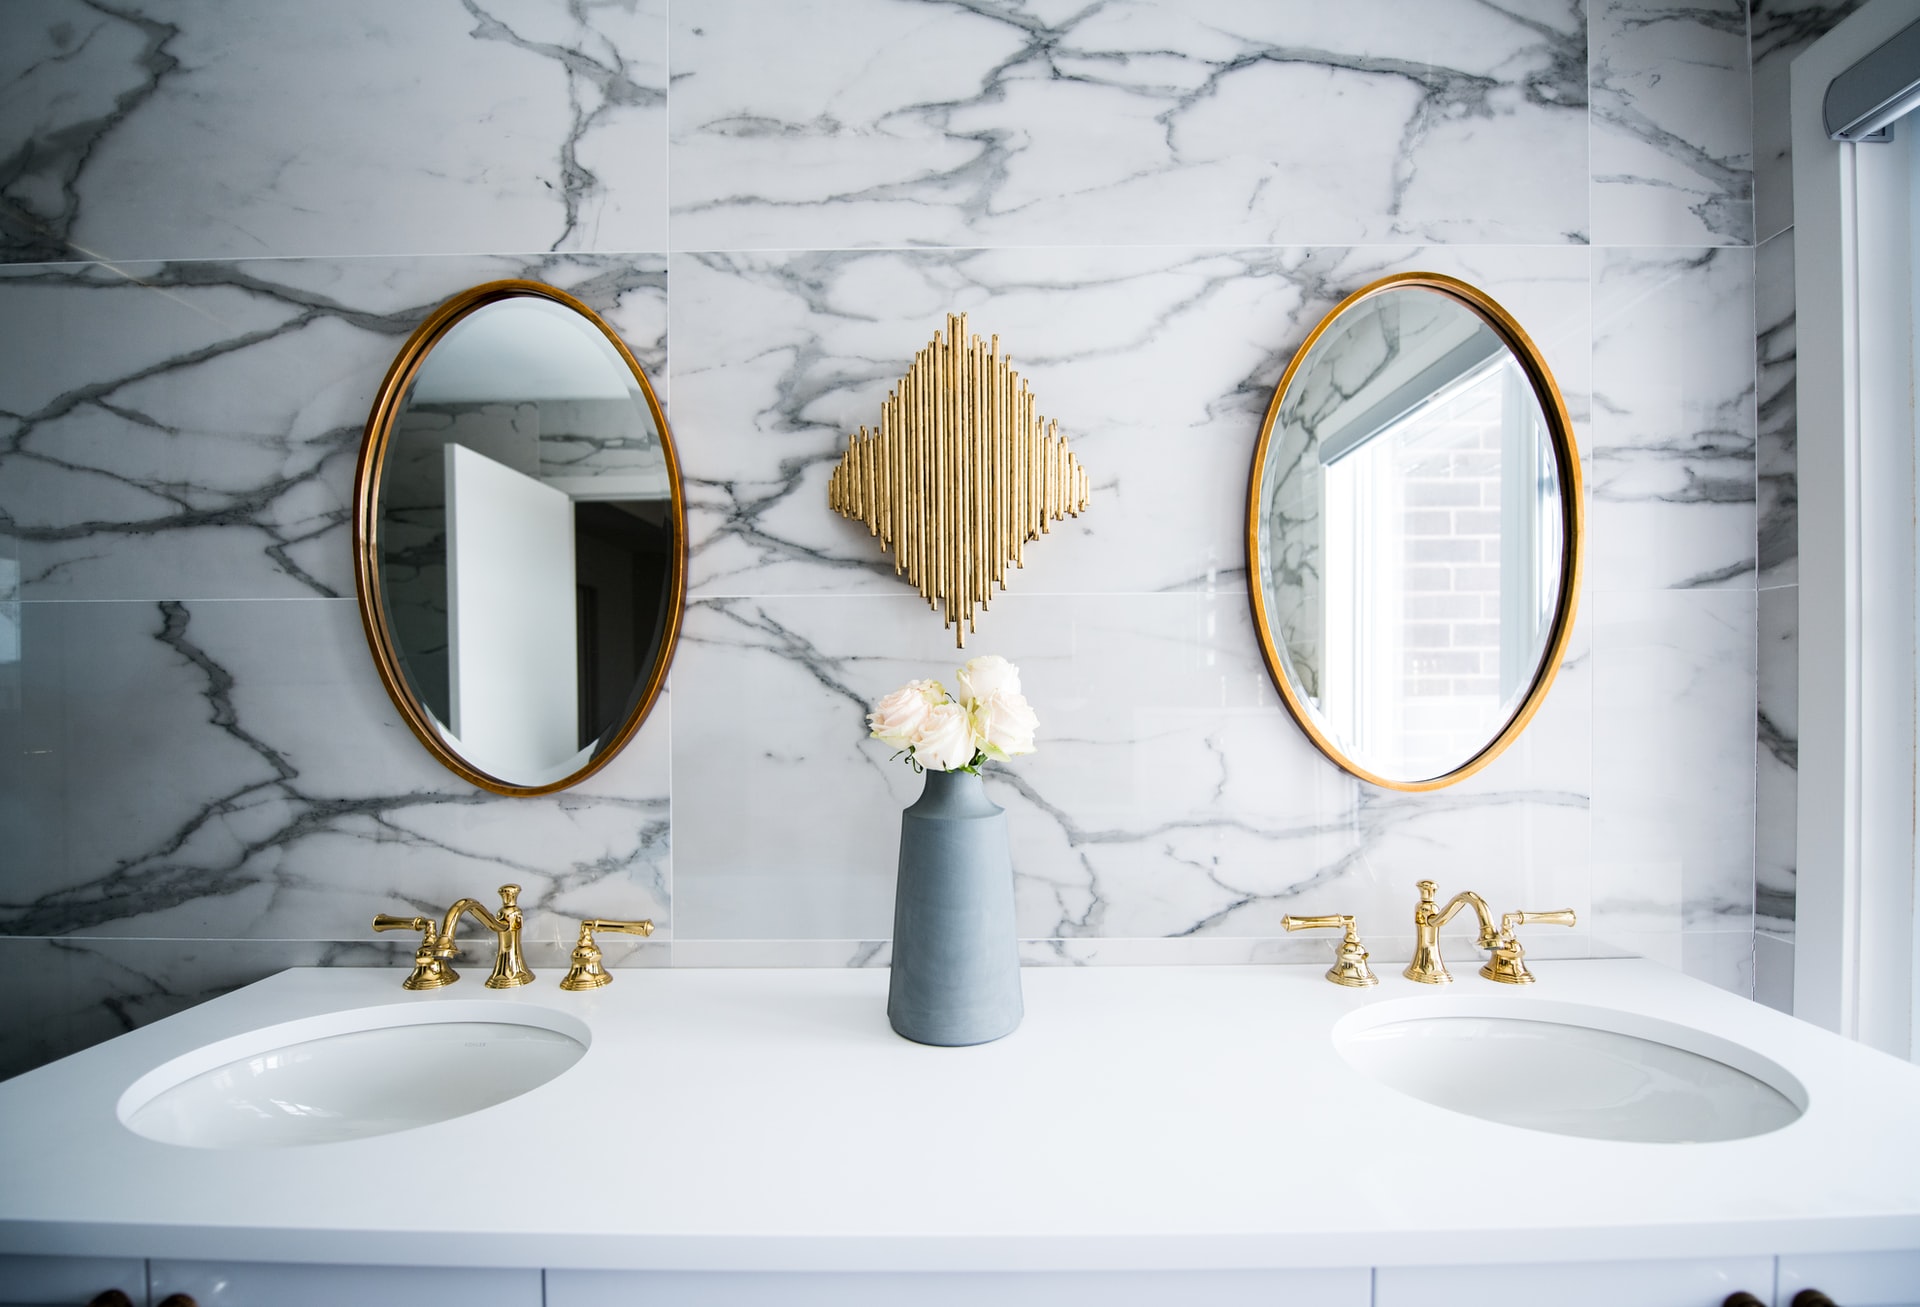 Two Gold Oval Mirrors Hanging On Marble Bathroom Wall above Bathroom Sinks